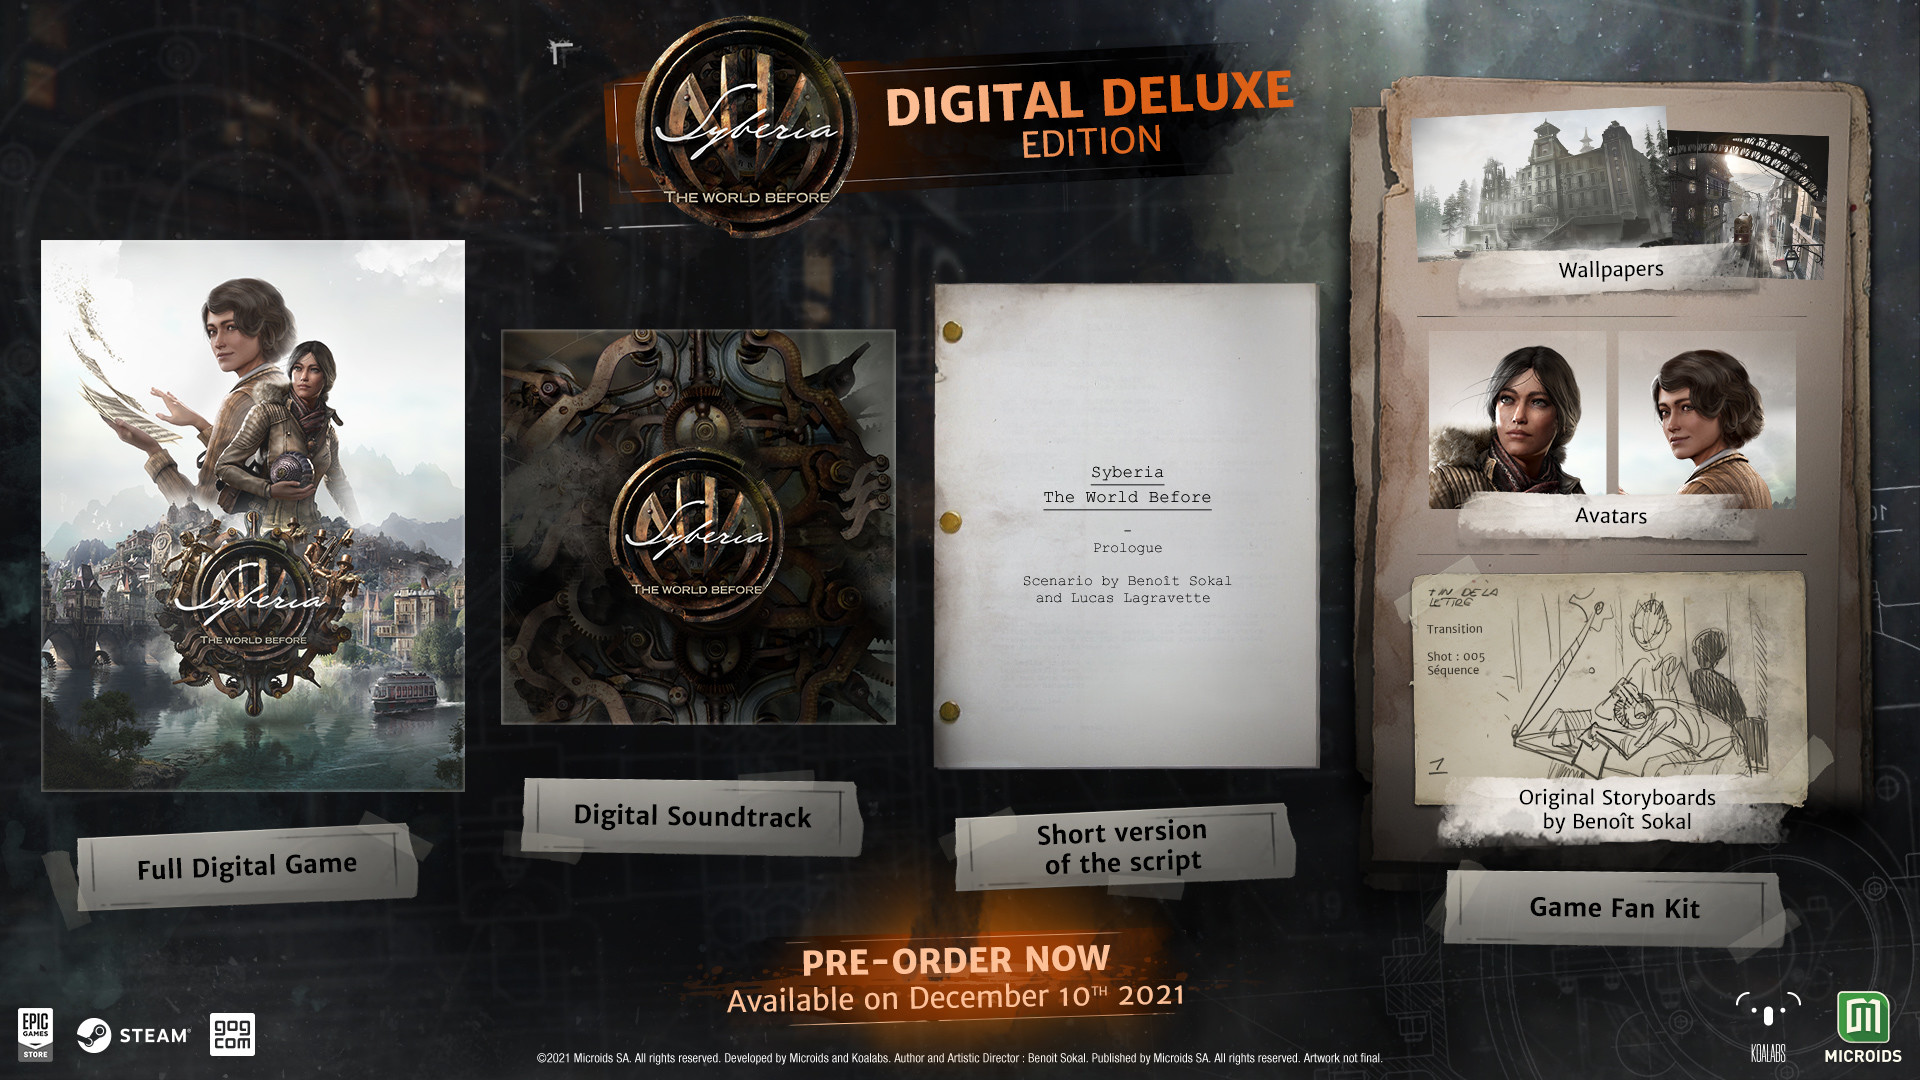 Syberia: The World Before - Deluxe Edition Upgrade Featured Screenshot #1